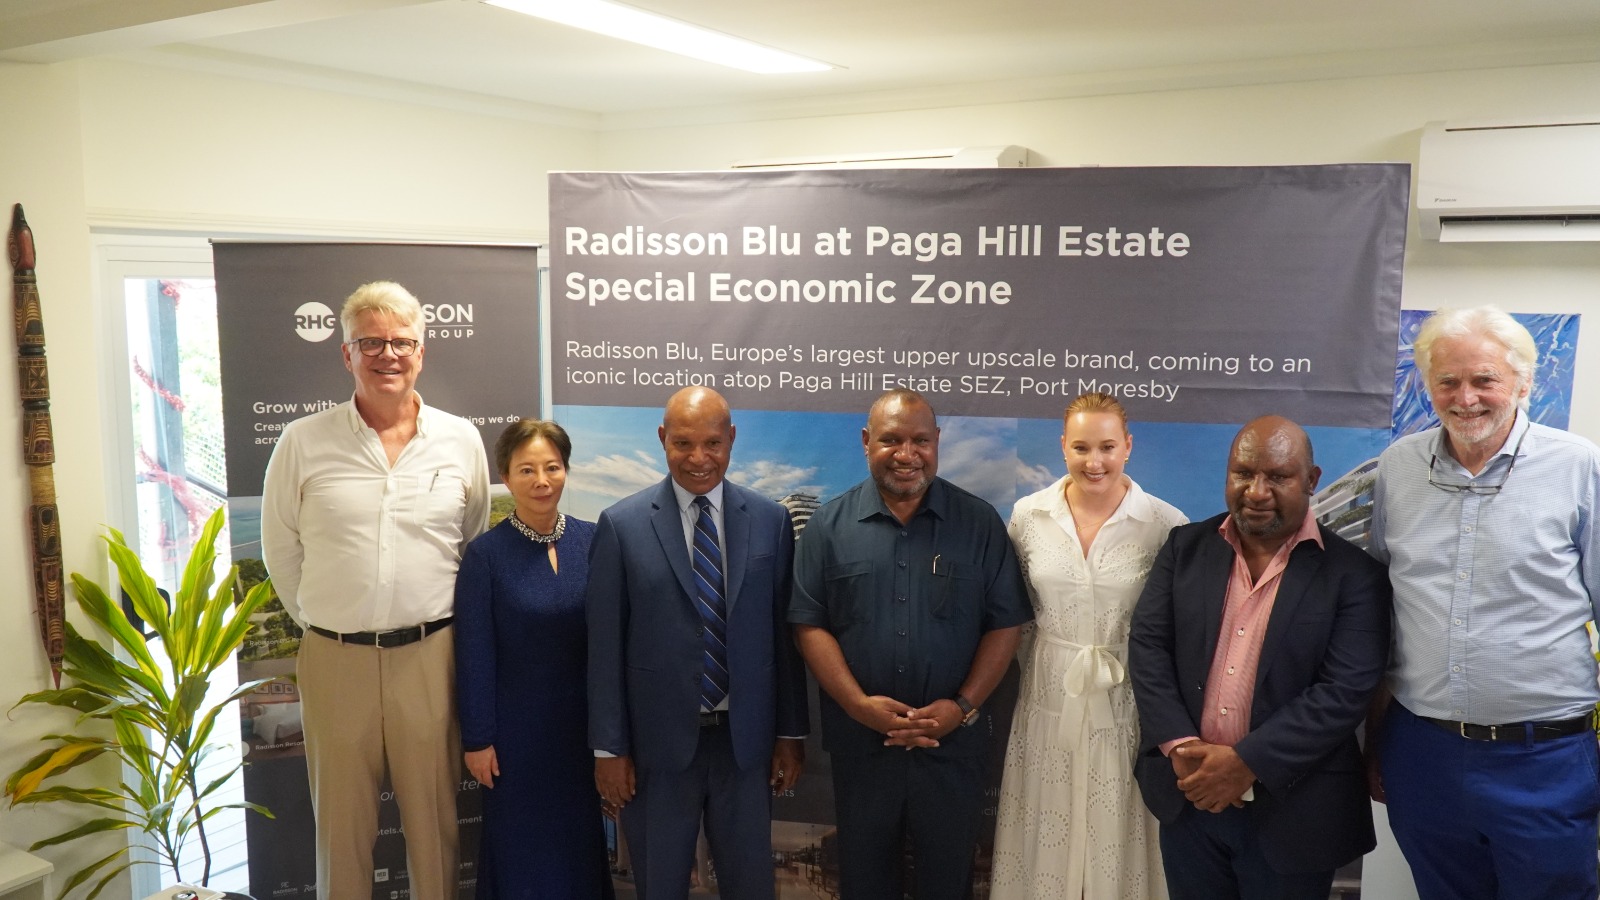 Prime Minister Hon. James Marape Welcomes Radisson Hotel Group’s Partnership with Paga Hill Special Economic Zone